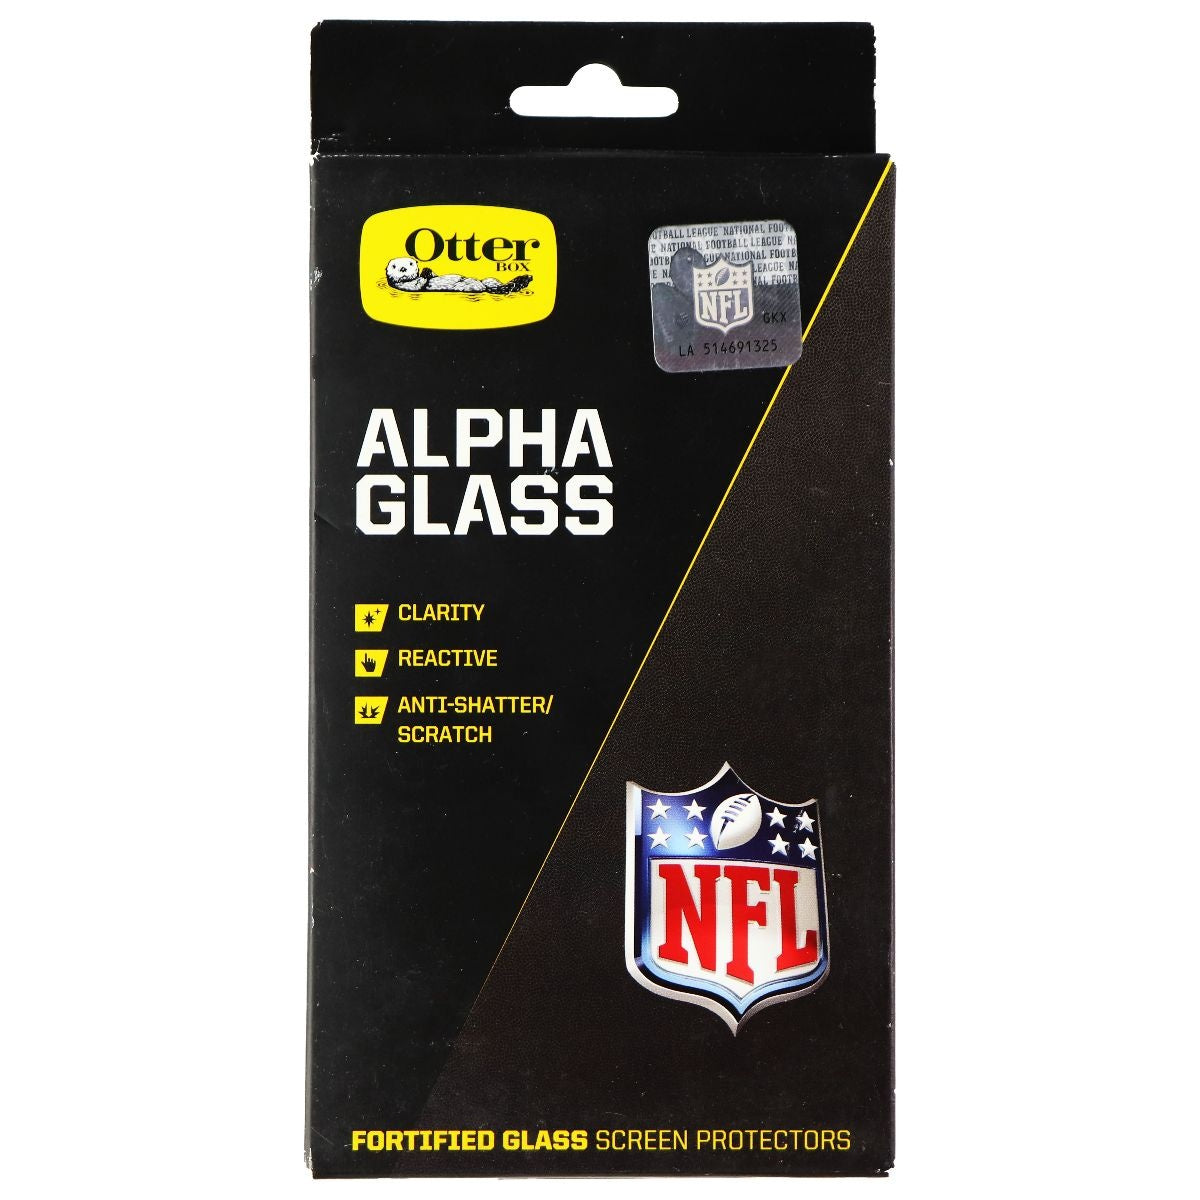 Otterbox Alpha Glass Screen Protector for iPhone (7+/6s+/6+) - Seahawks